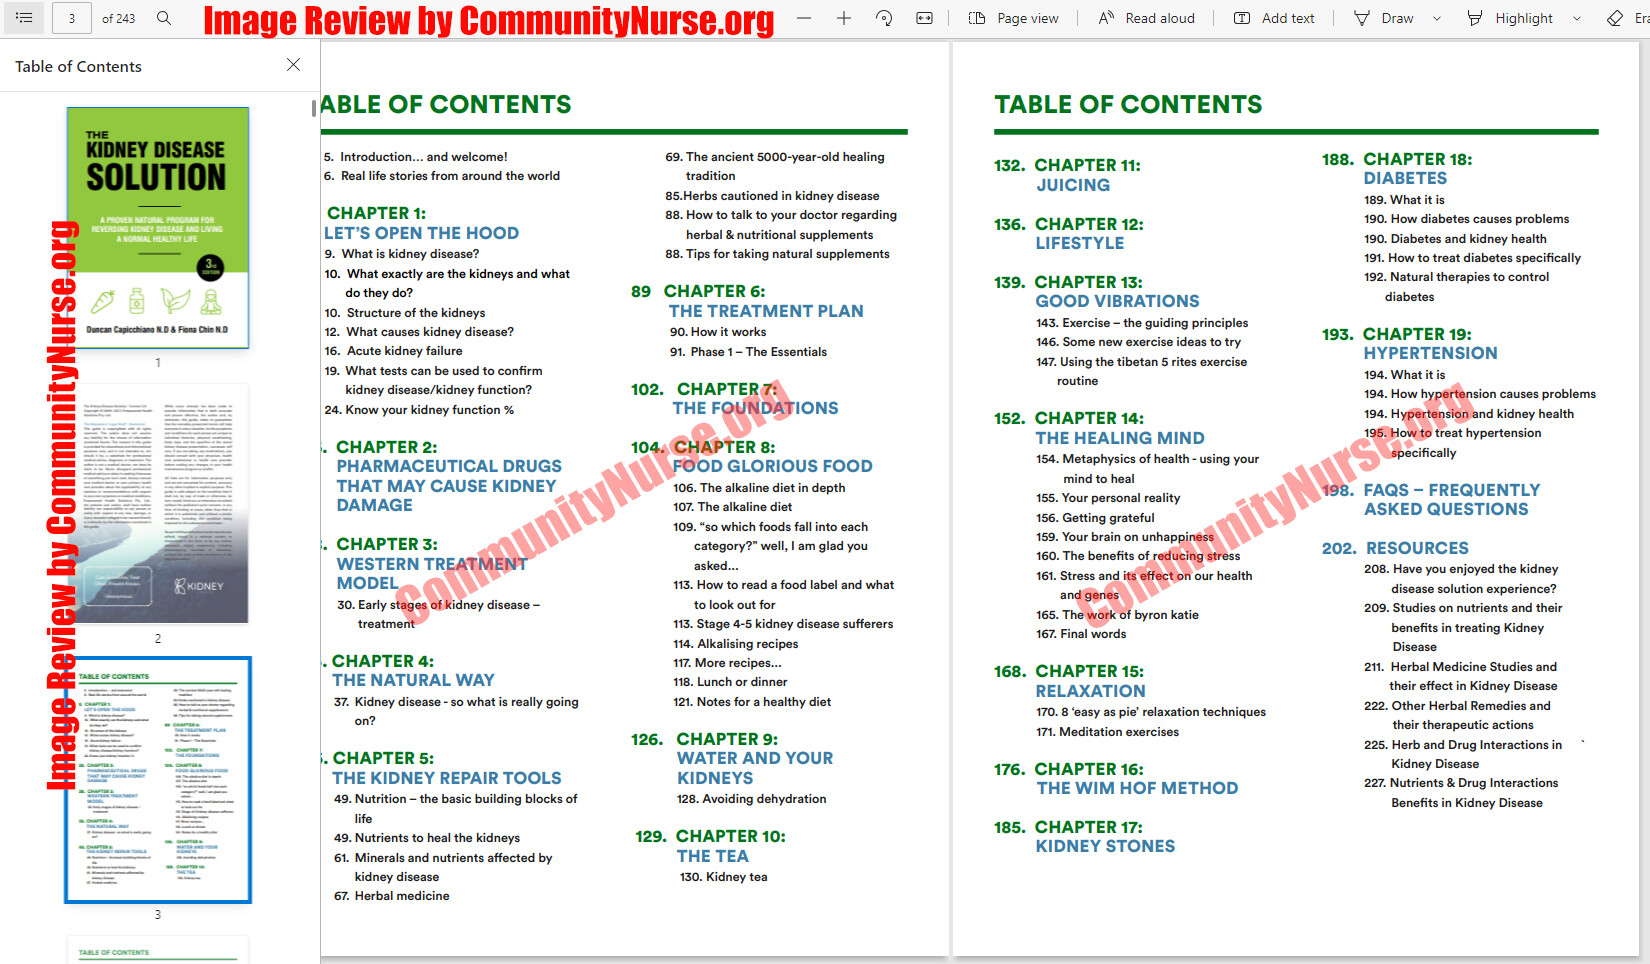 The Program's Table of Contents